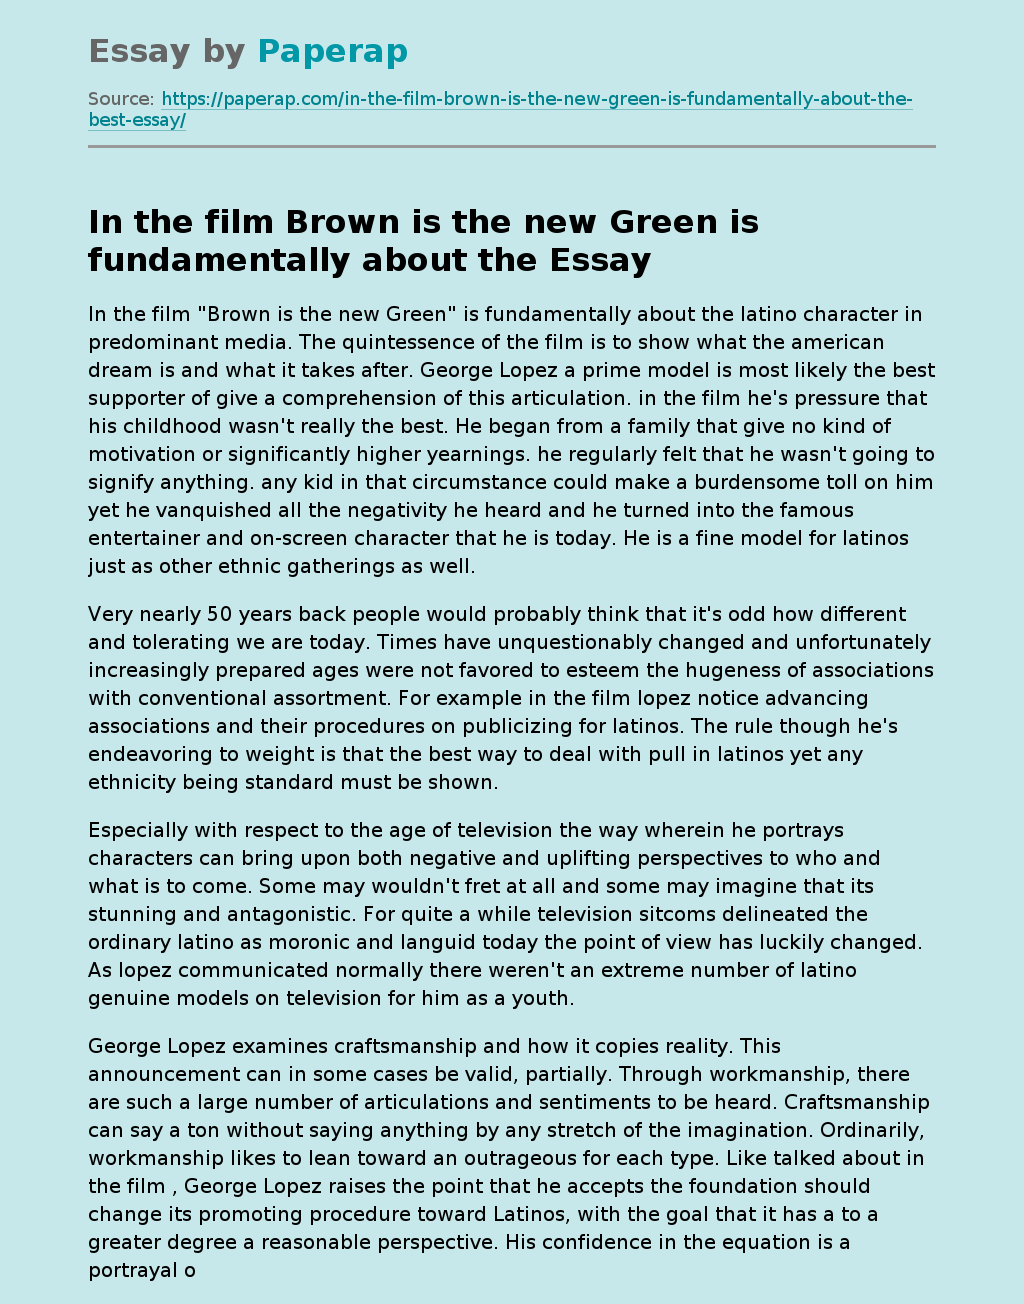 In the film Brown is the new Green is fundamentally about the